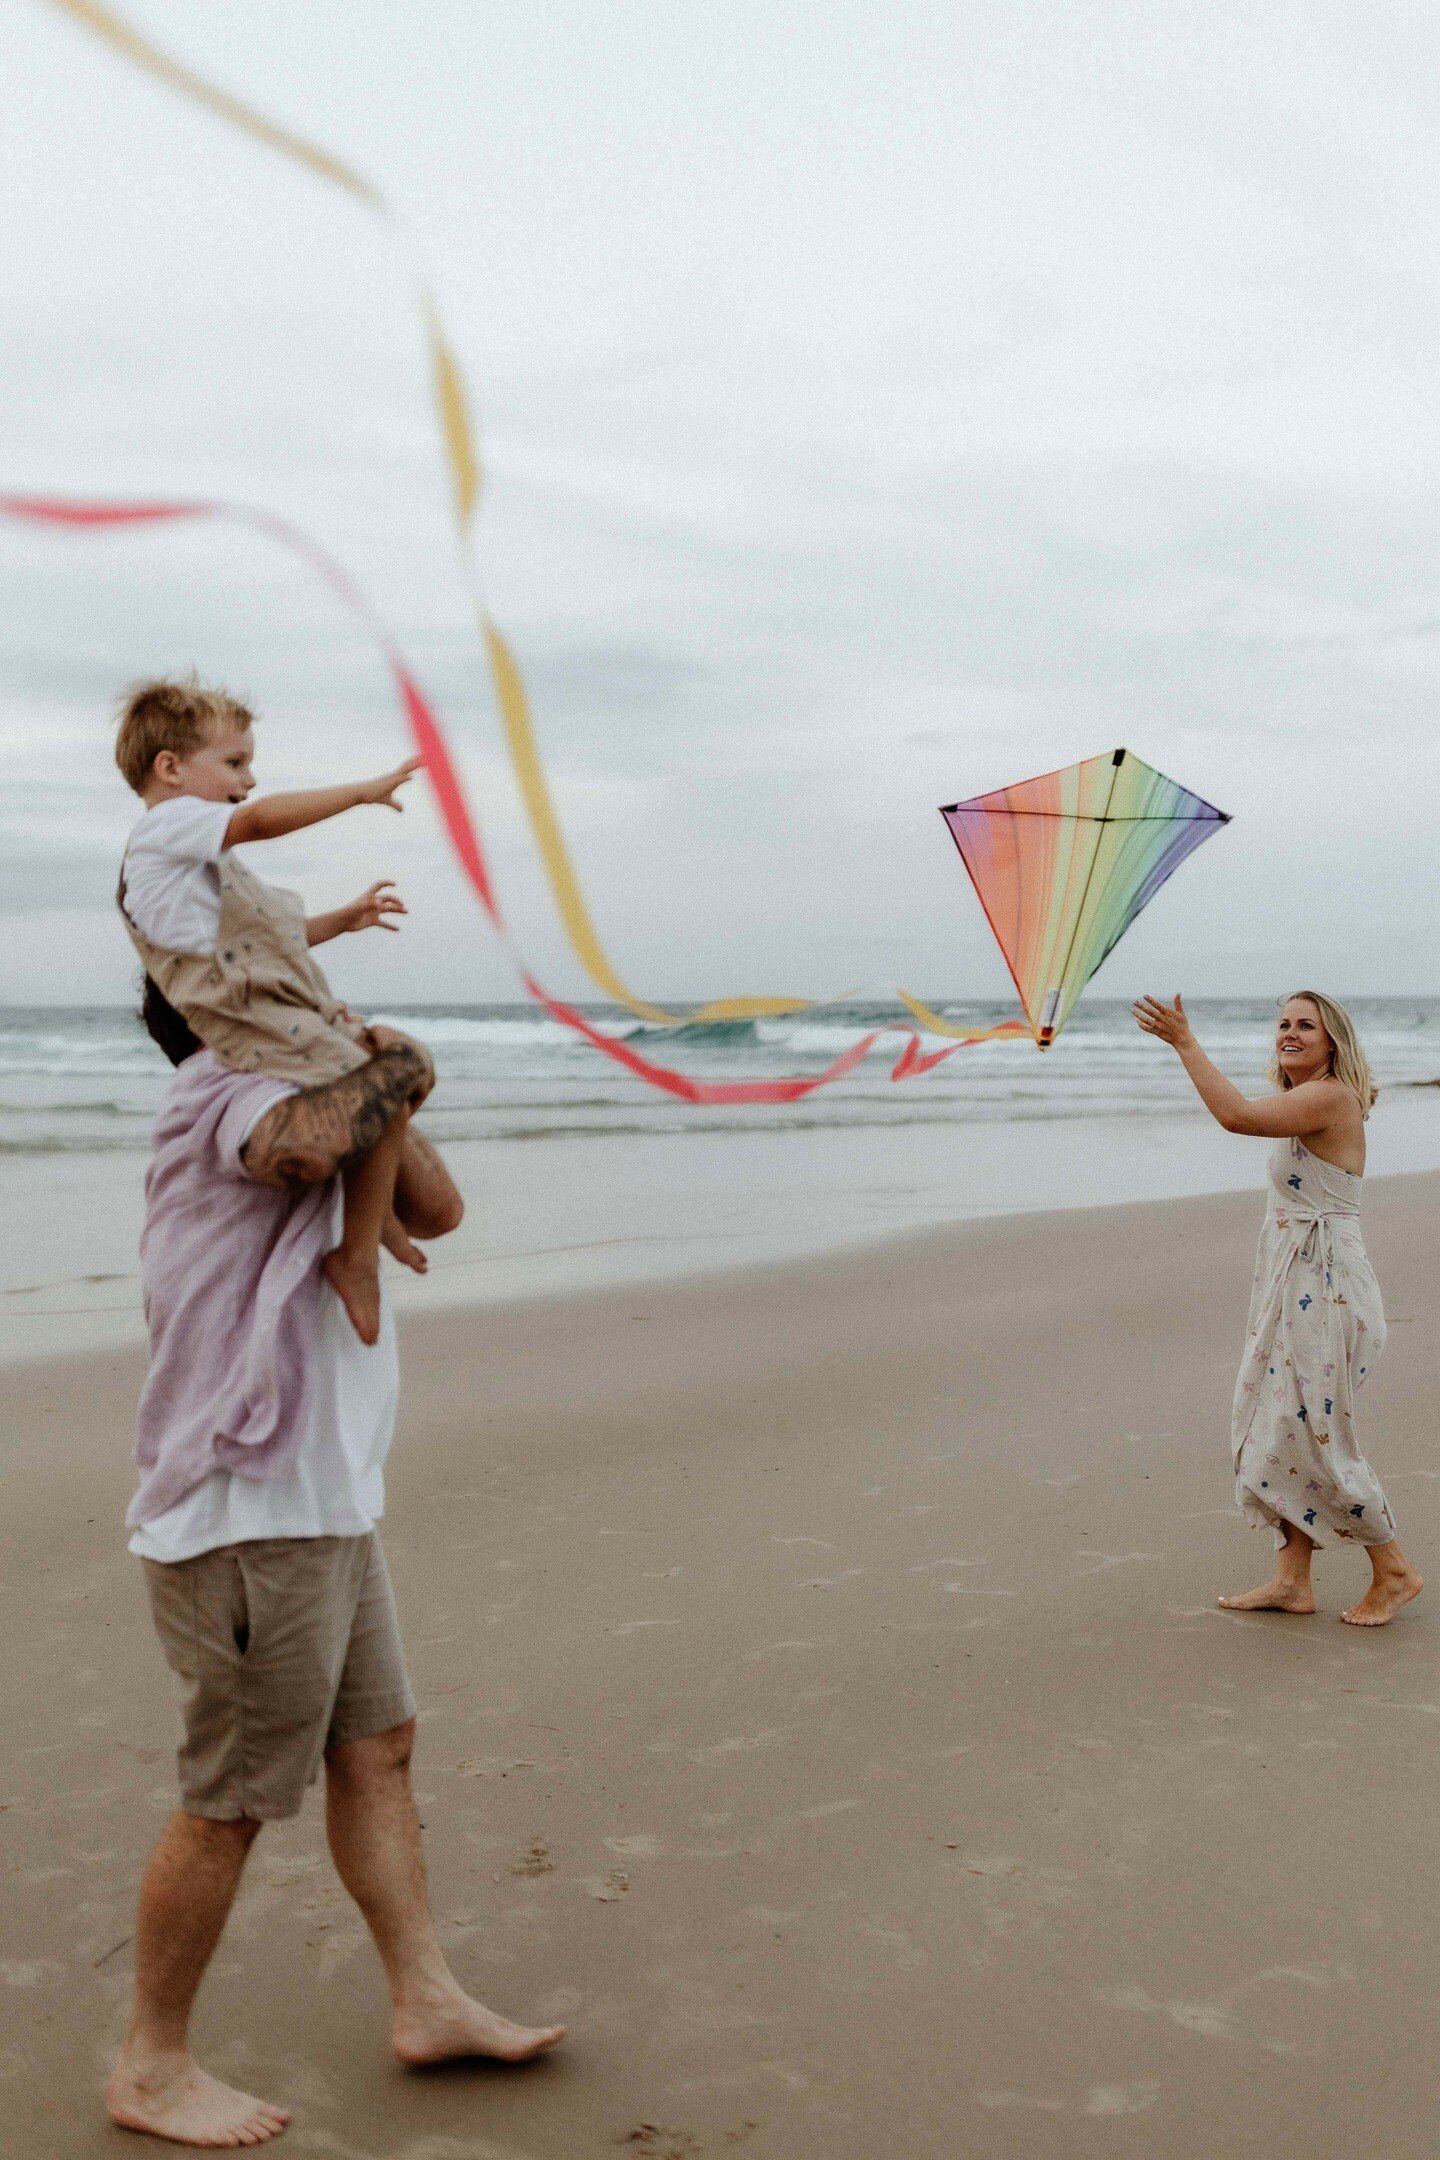 Parenting is like flying a kite&hellip;you do an awful lot of running around
using every breath you have to get your children up off the ground.

And you never feel prouder&hellip;remember how you grinned
The first time you saw your children fly&hell